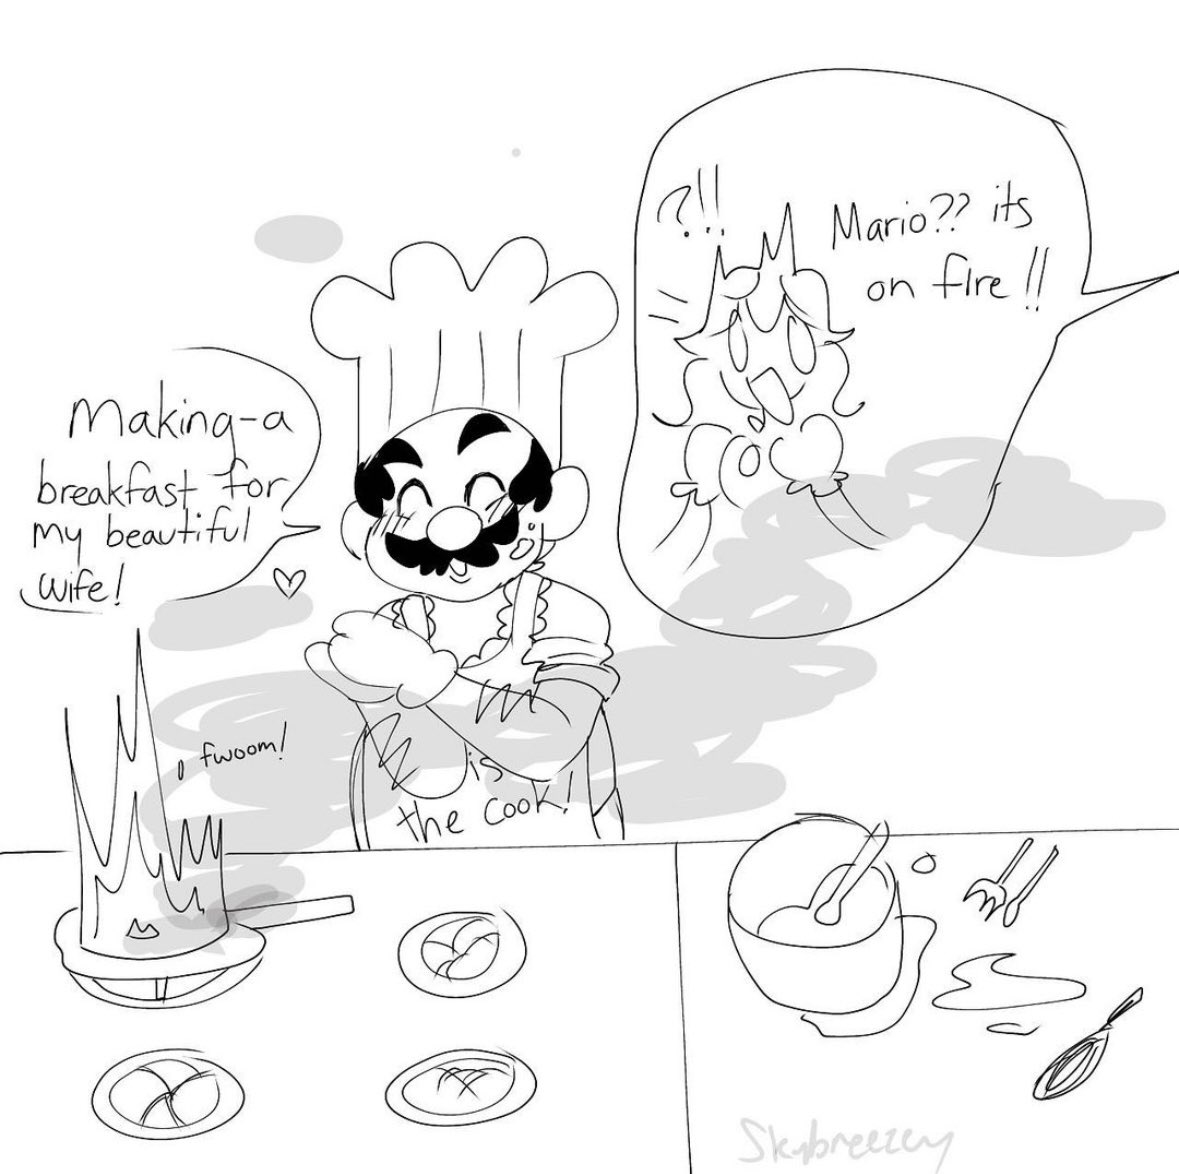 A thing I drew in July that I didn’t post on twt- Mario would Neva burn food we all know this, but just this once….👁️👁️ he did 
#princesspeach #mario #supermario #mariobrothers #mariofanart #mareach #princesspeachxmario